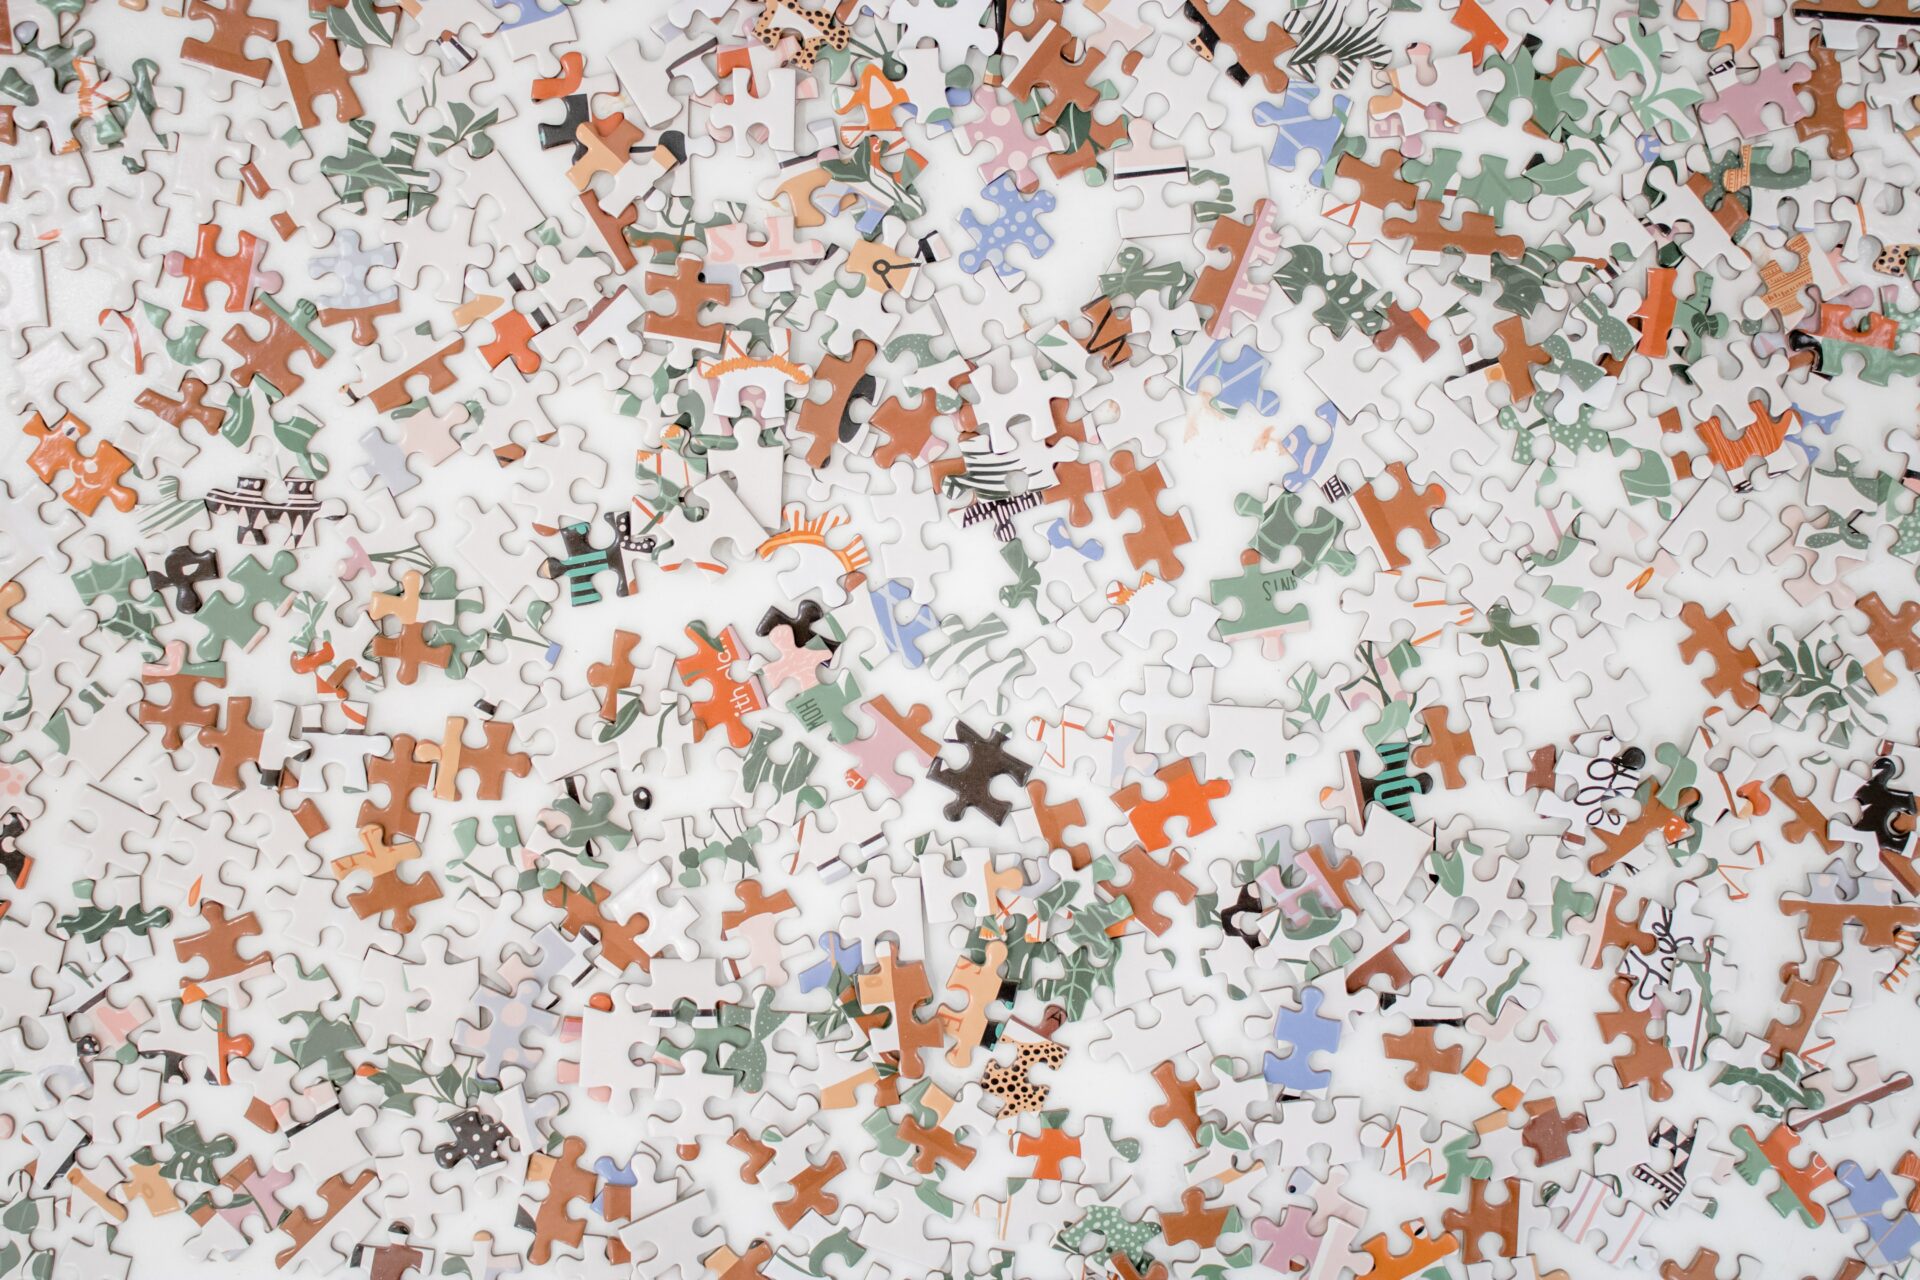 White, orange, light blue, sage green, pink, and tan puzzle pieces